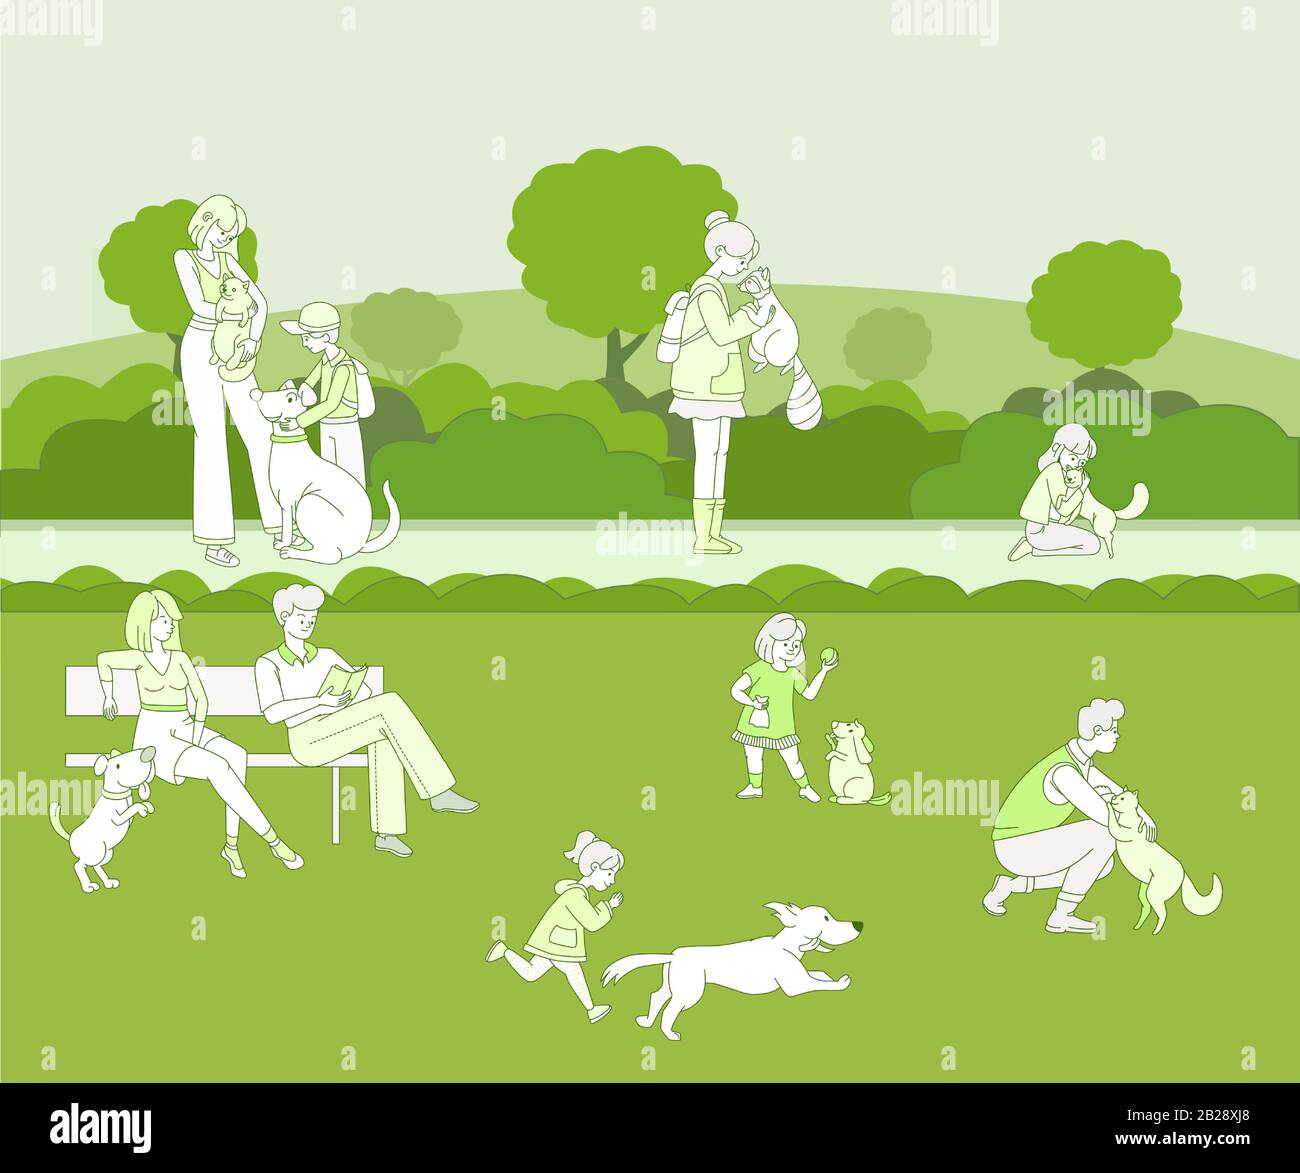 Scenes with pet owners. People holding, playing and walking with their domestic animals in park or forest. Friendly happy dogs, cats, raccoons with owners outline illustration. Stock Vector